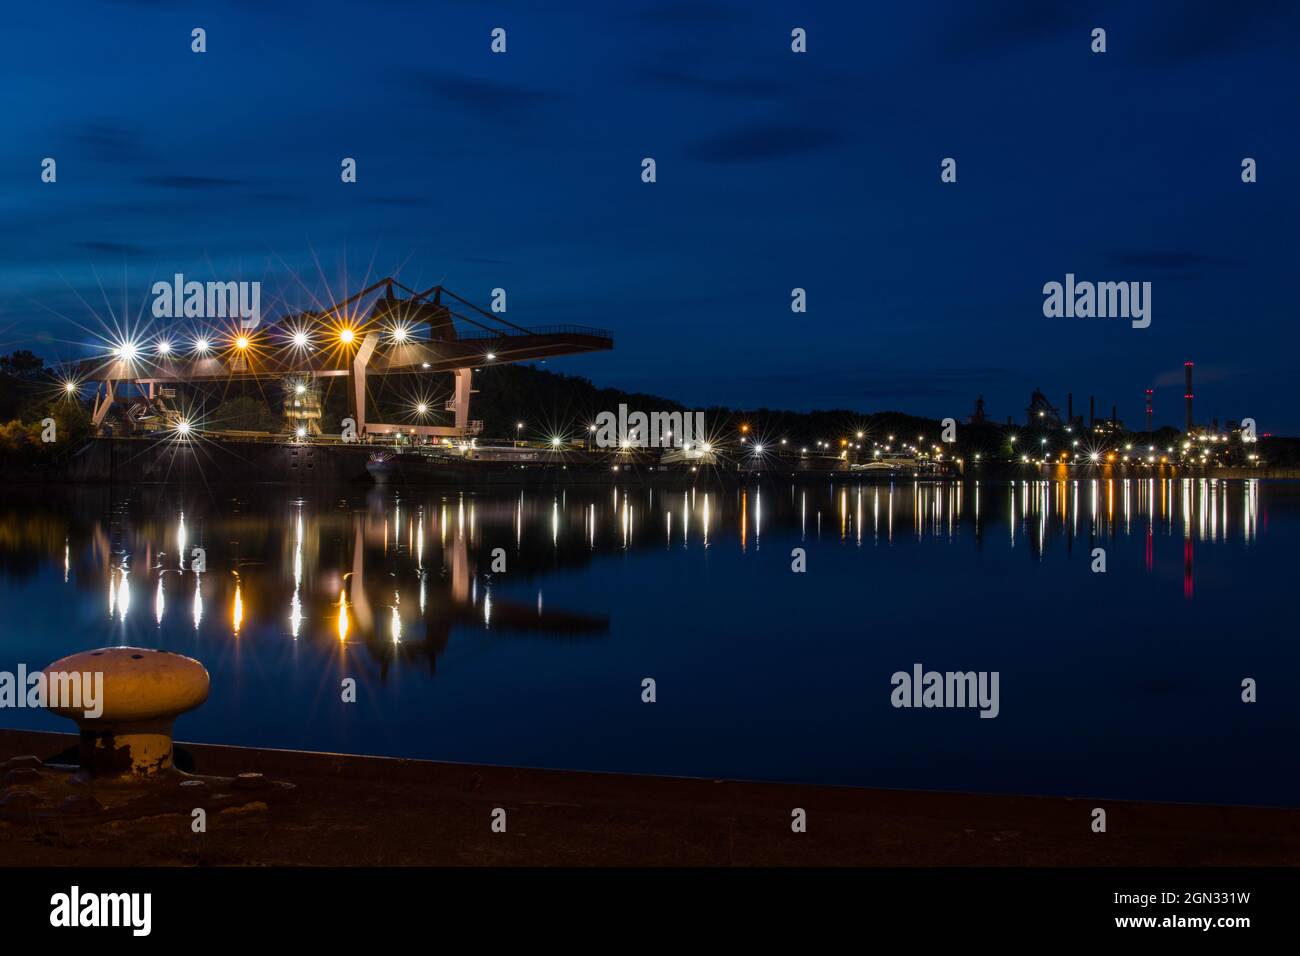 Industrial harbor at night with a view of a steel mill called Dillinger Hütte in Dillingen Saar, Germany Stock Photo